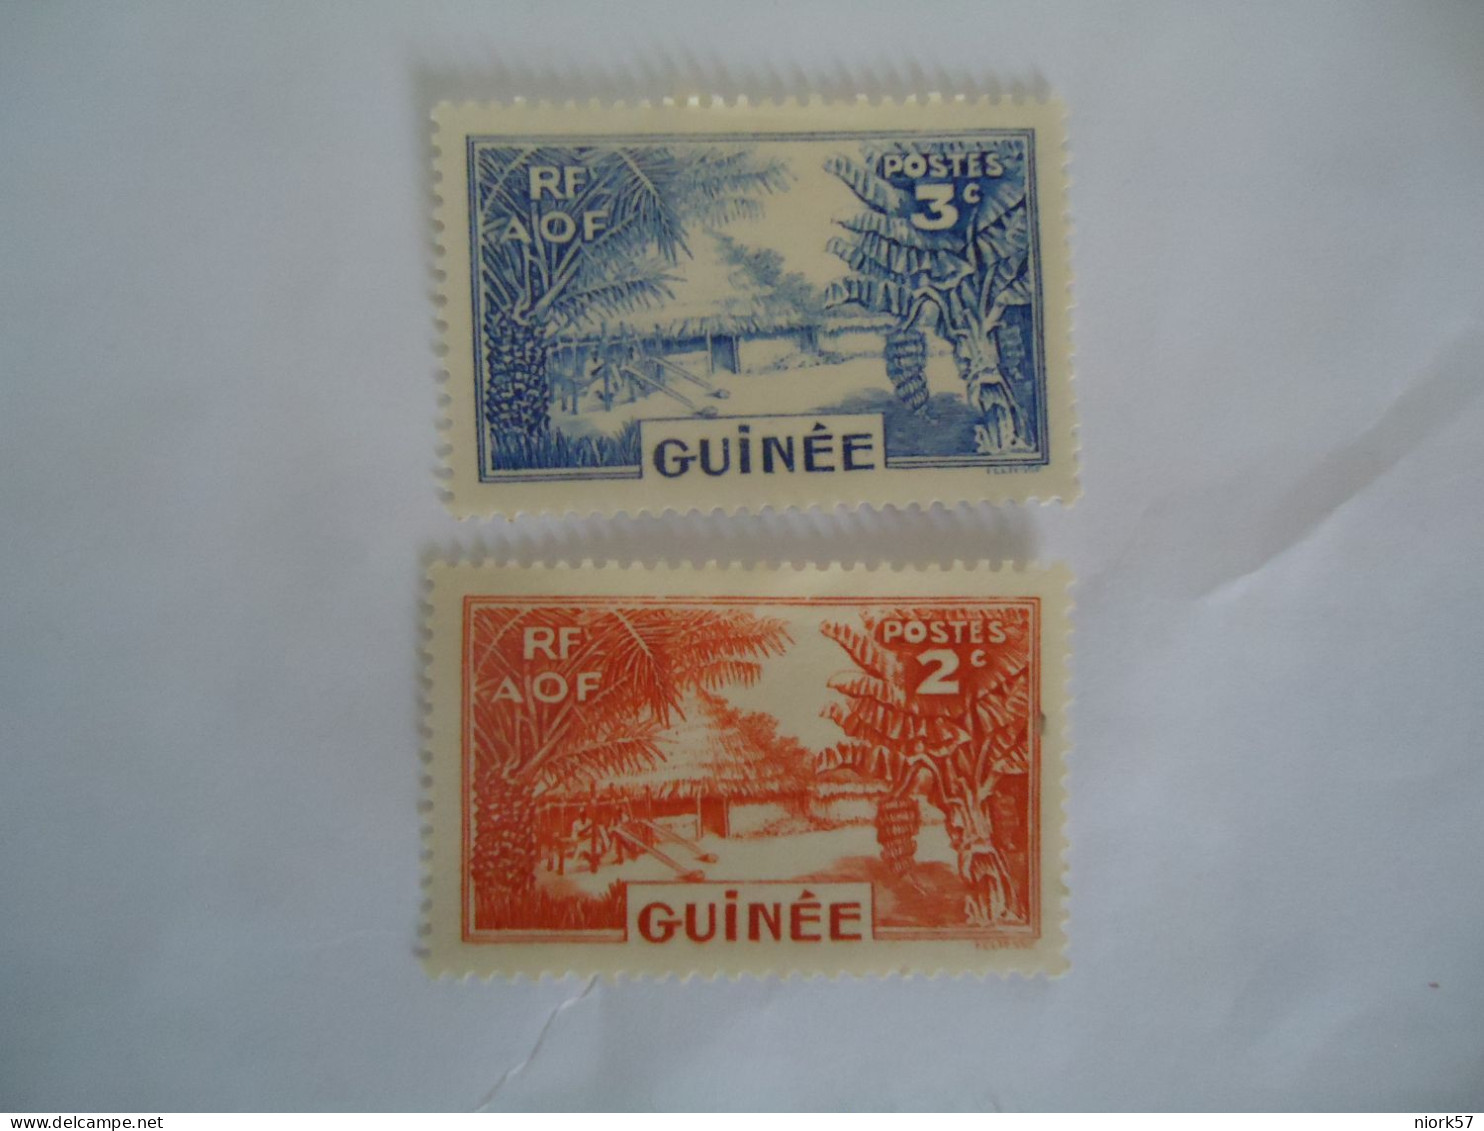 GUINEE  GUINEA  MLN STAMPS 2 LANDSCAPES - Guinea (1958-...)